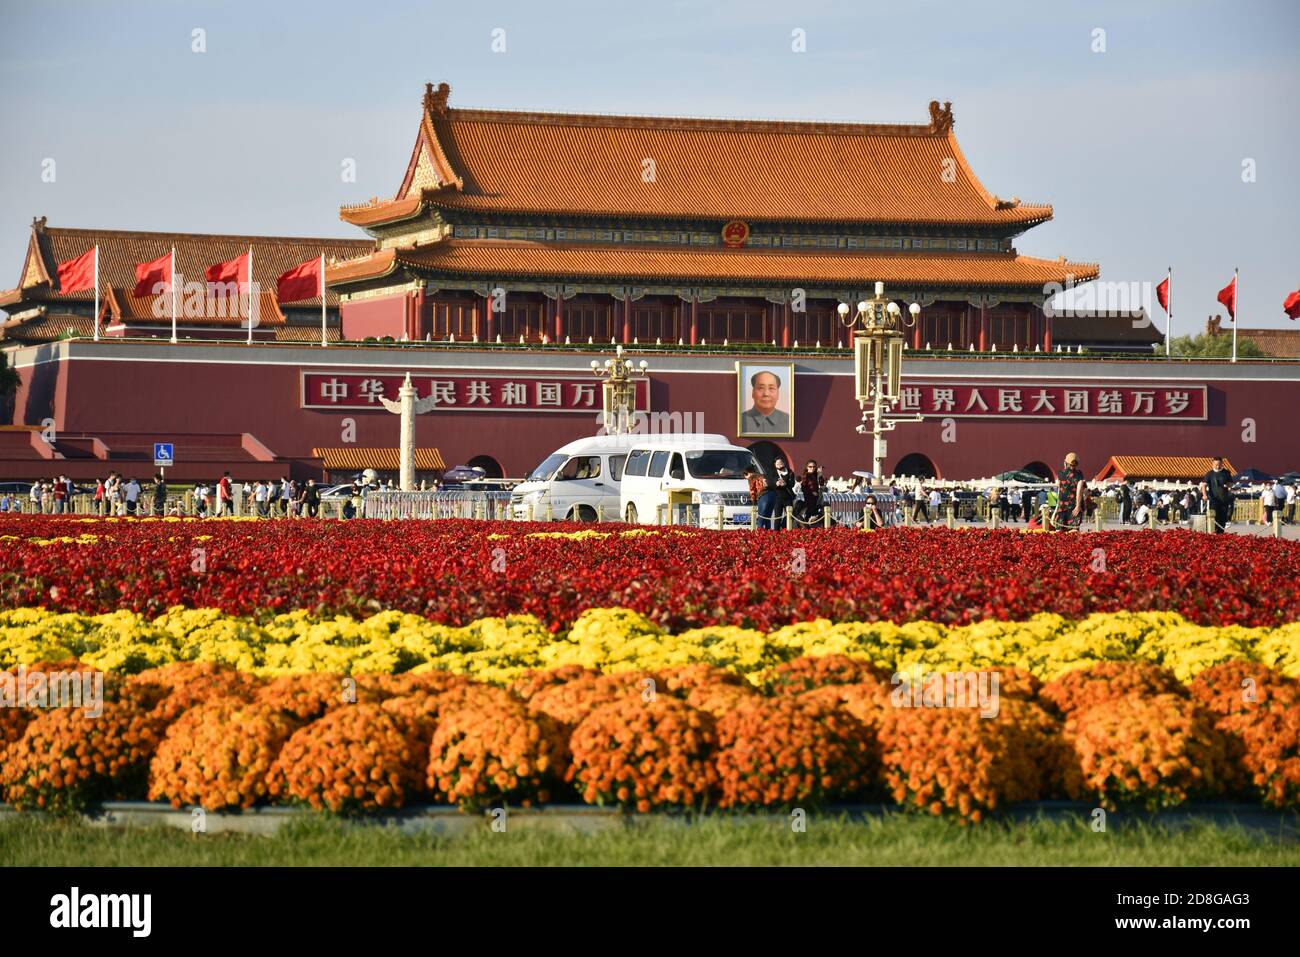 Decoration flowers bloom in the Tian'anmen Square, well-prepared for the National Day of China, Beijing, China, 20 September 2020. Stock Photo